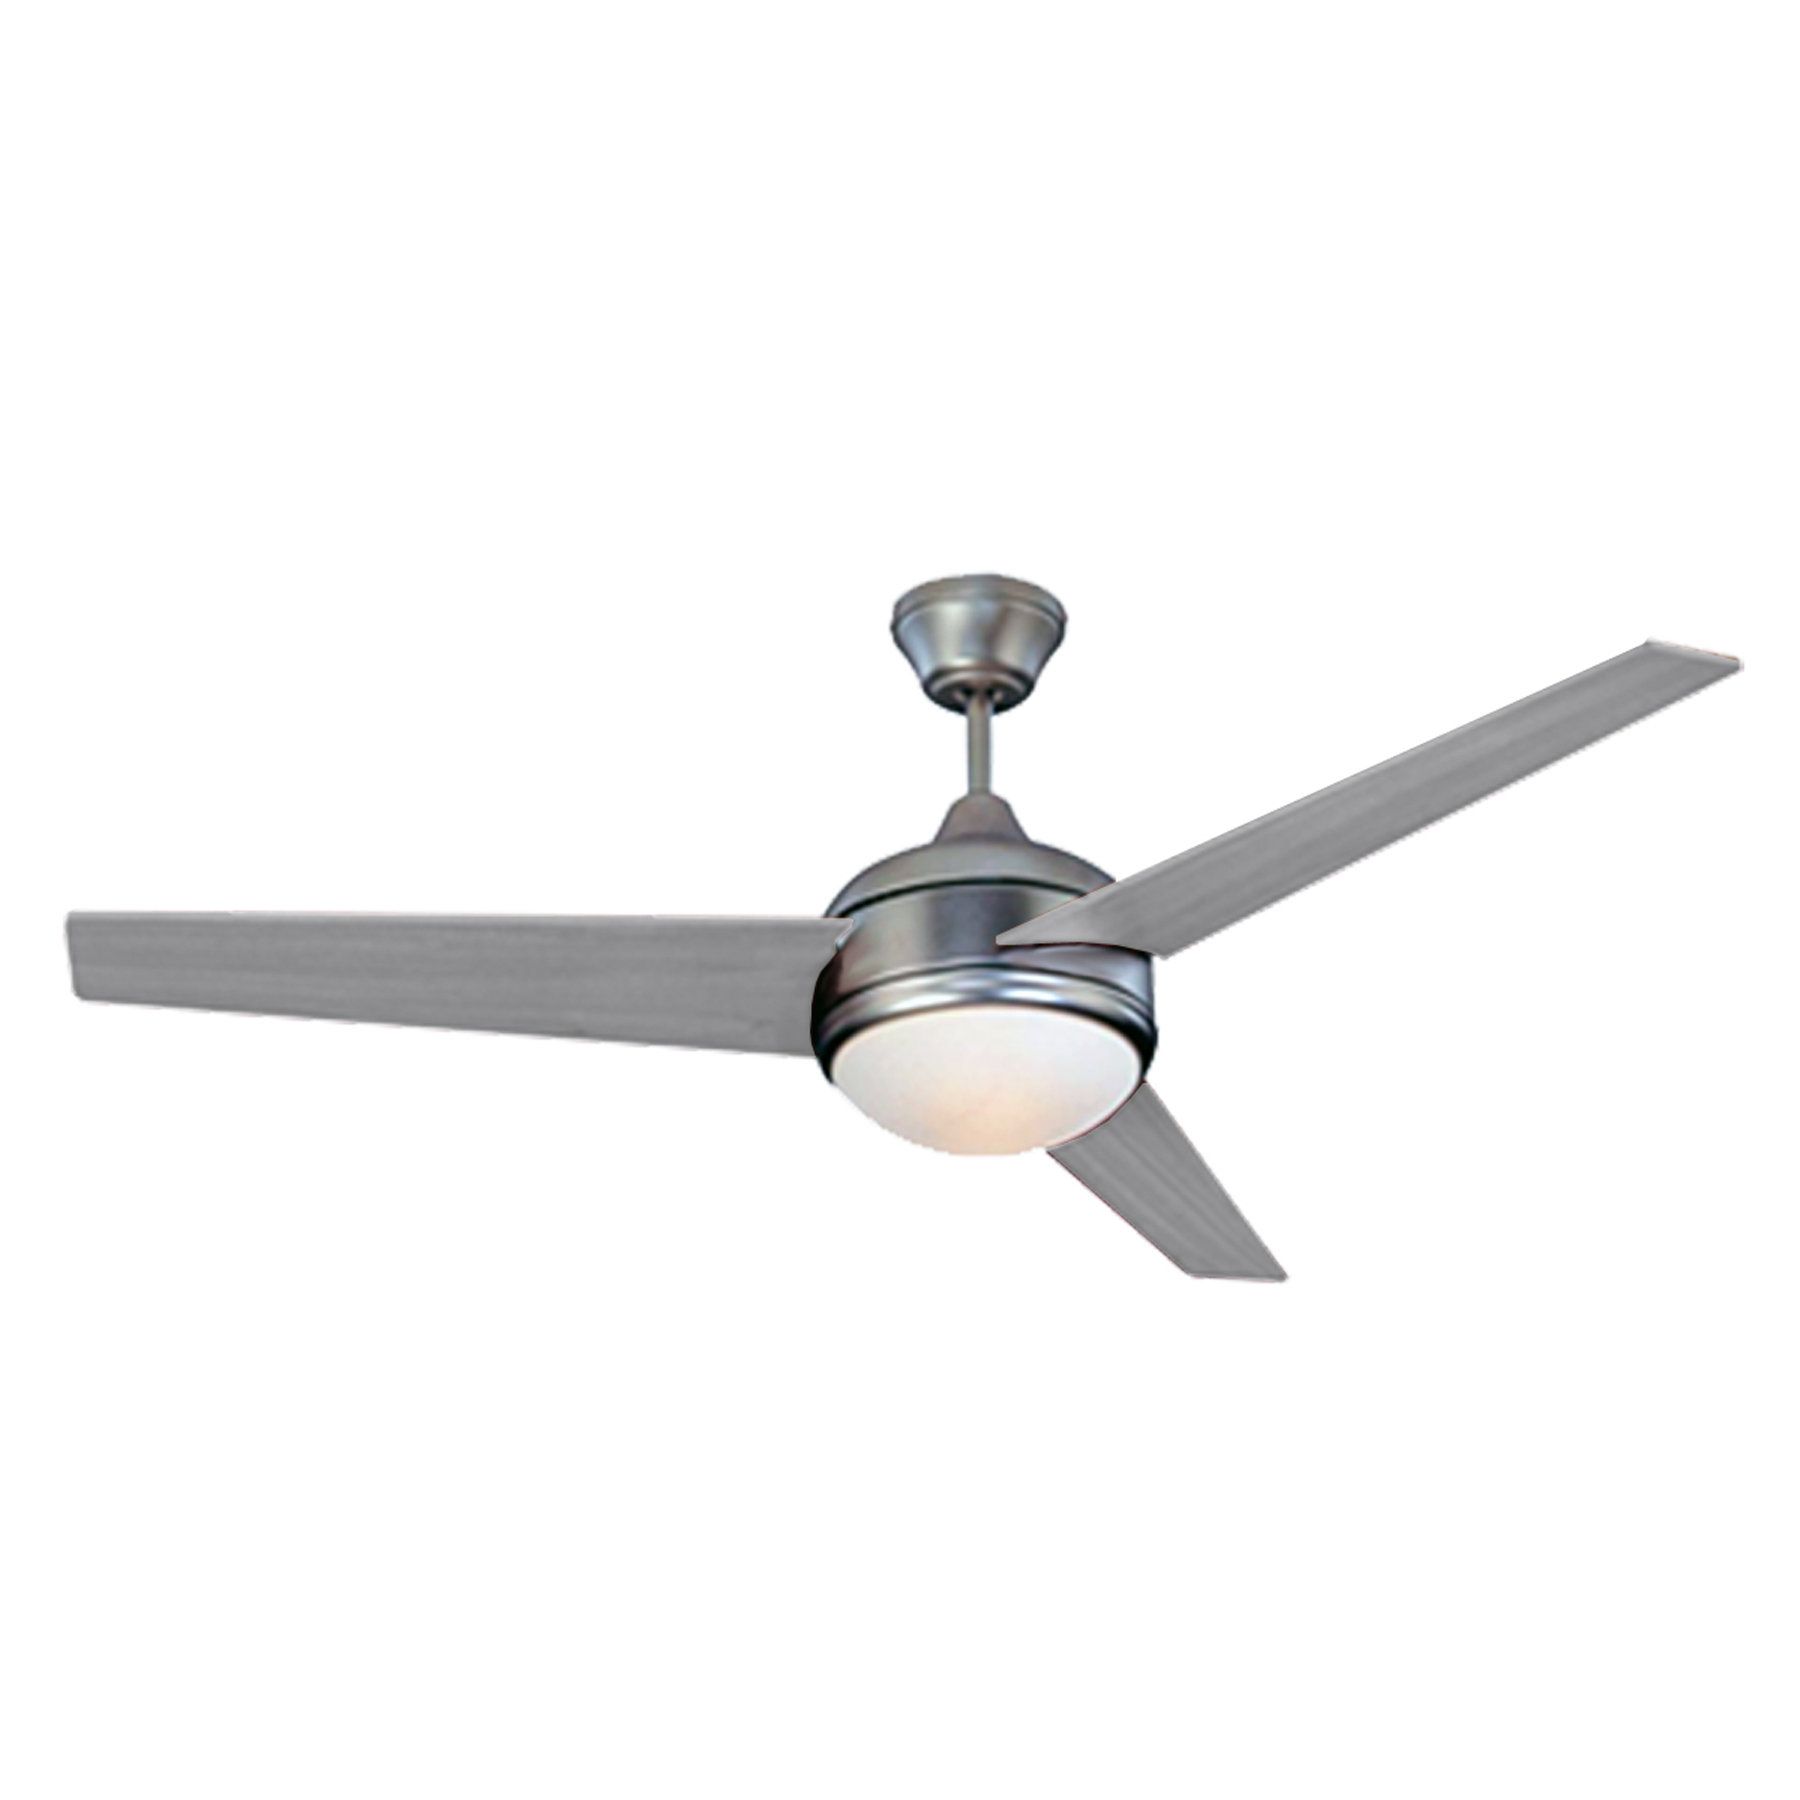 Dennis 3 Blade Ceiling Fans Pertaining To Fashionable 52" Blakley 3 Blade Ceiling Fan (View 4 of 20)